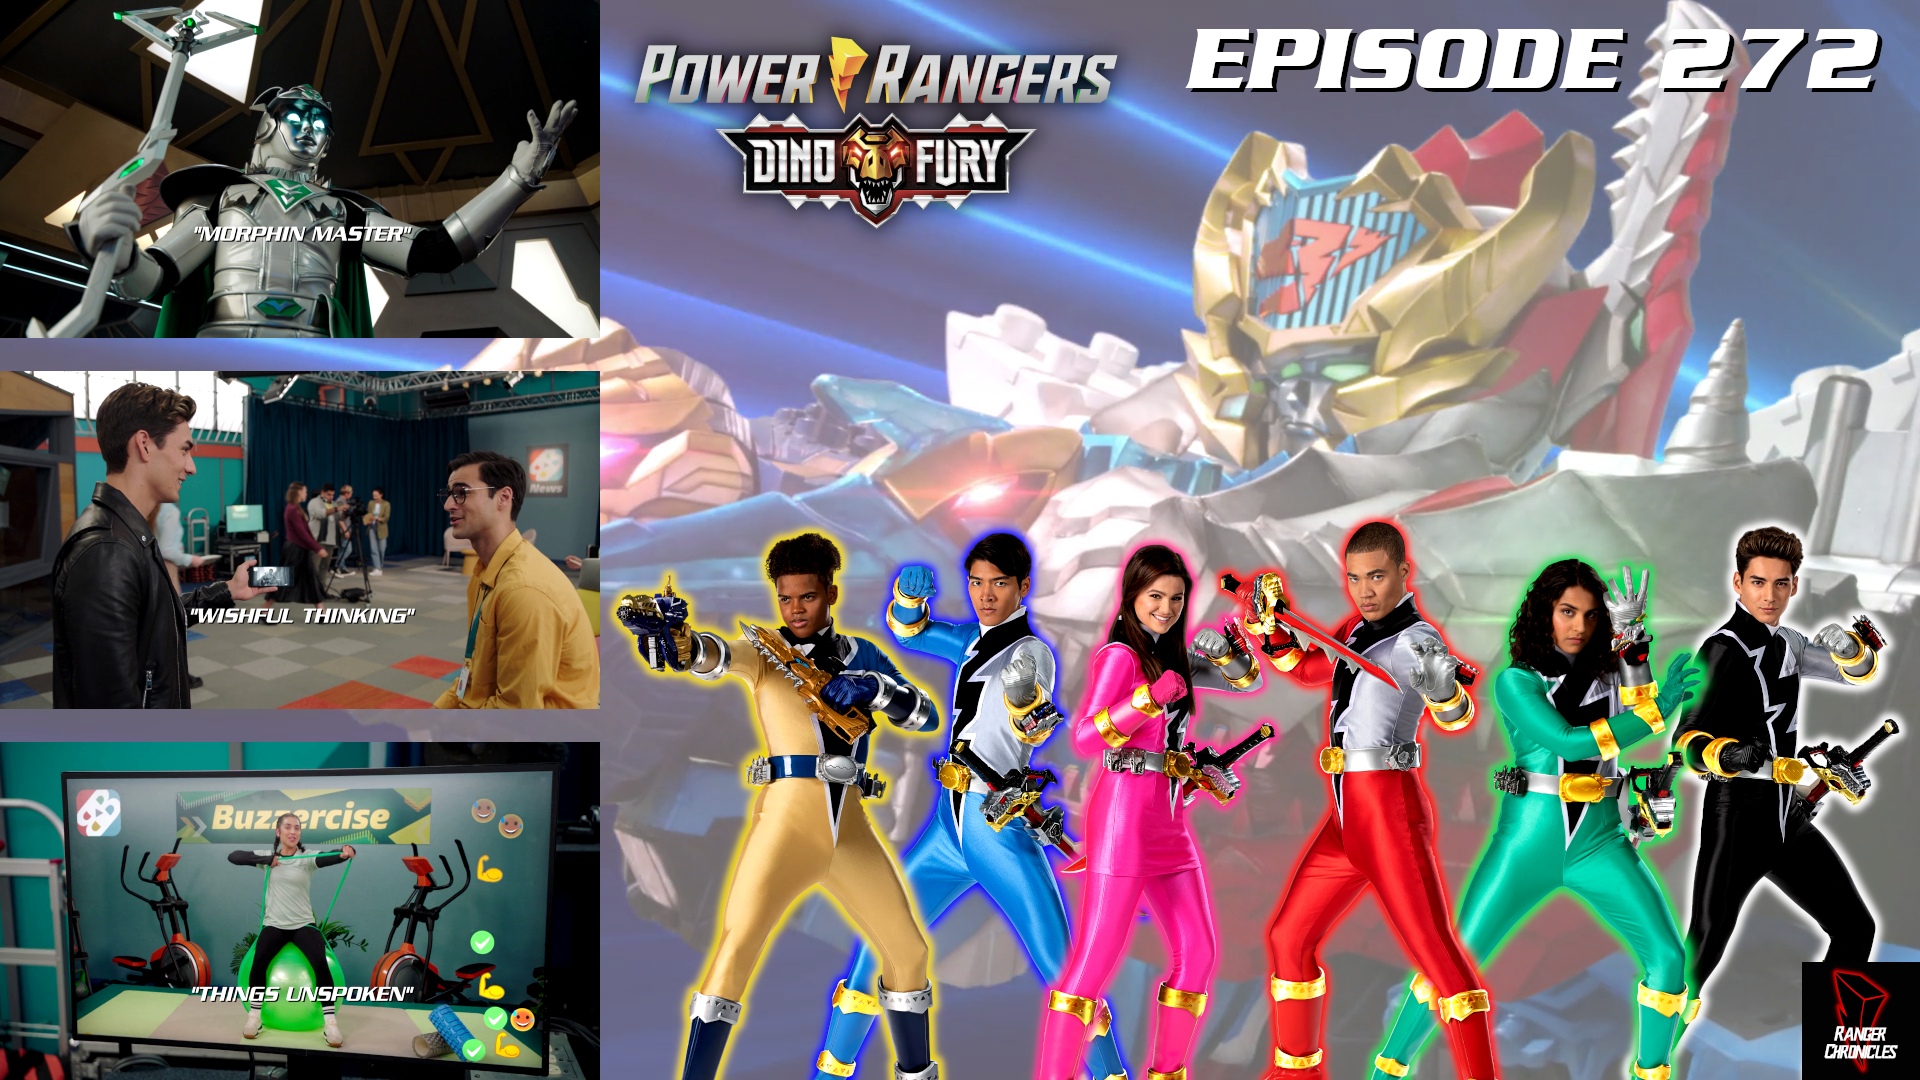 Ranger Chronicles Episode 272 — Dino Fury S2: “Morphin Master,” “Wishful  Thinking” and “Things Unspoken” – Two True Freaks